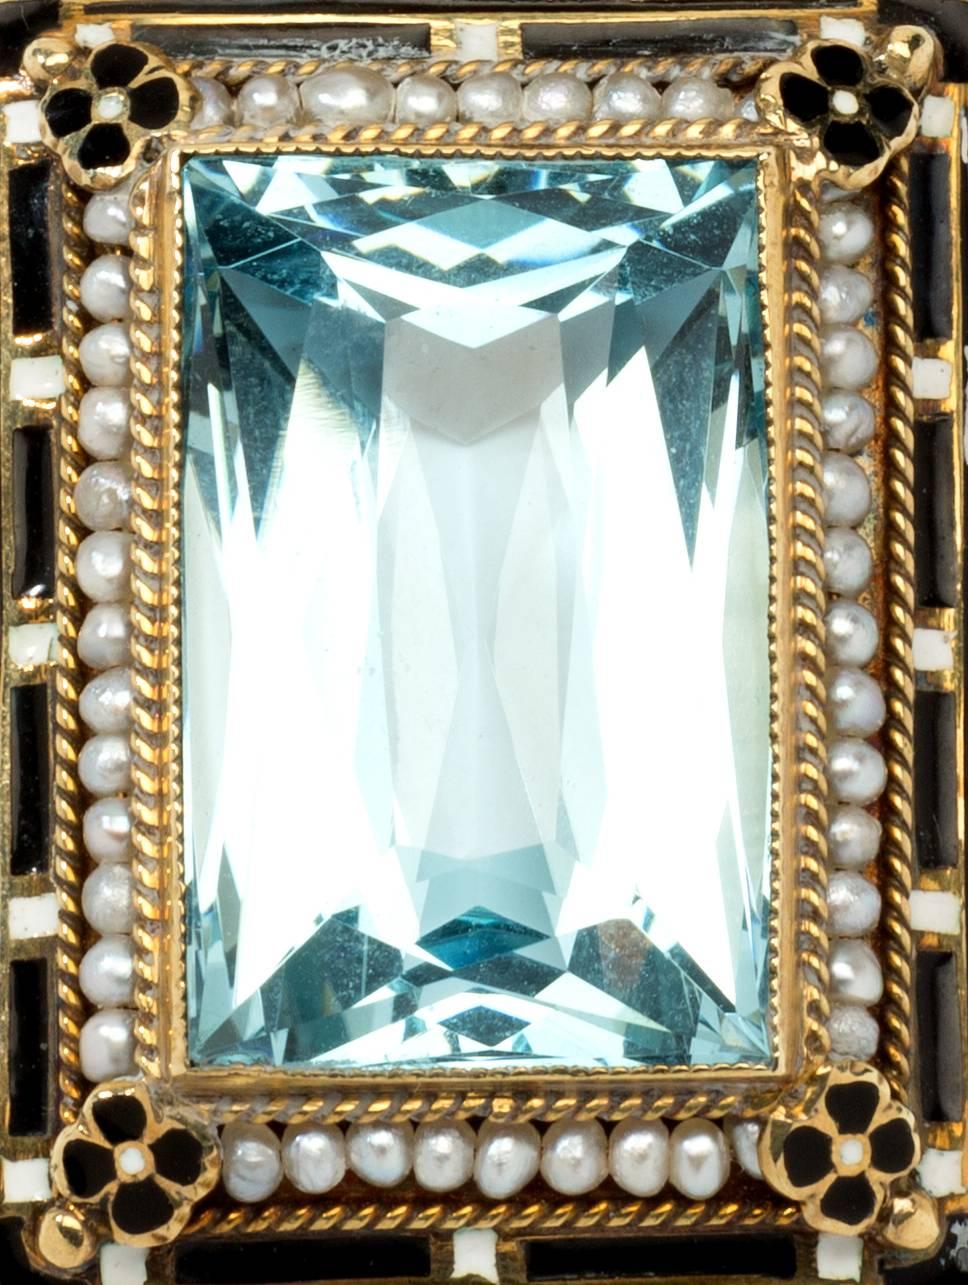 Europe, about 1910. 2 scissors-cut aquamarine weighing 0,66 carats and 20,38 carats. Surrounded with oriental pearls, enameled. Mounted in 18K yellow gold. Total weight: 25,73 grams. 
Pendant measurements: 1.85 x 0.94 in ( 4,7 x 2,4 cm ). Length